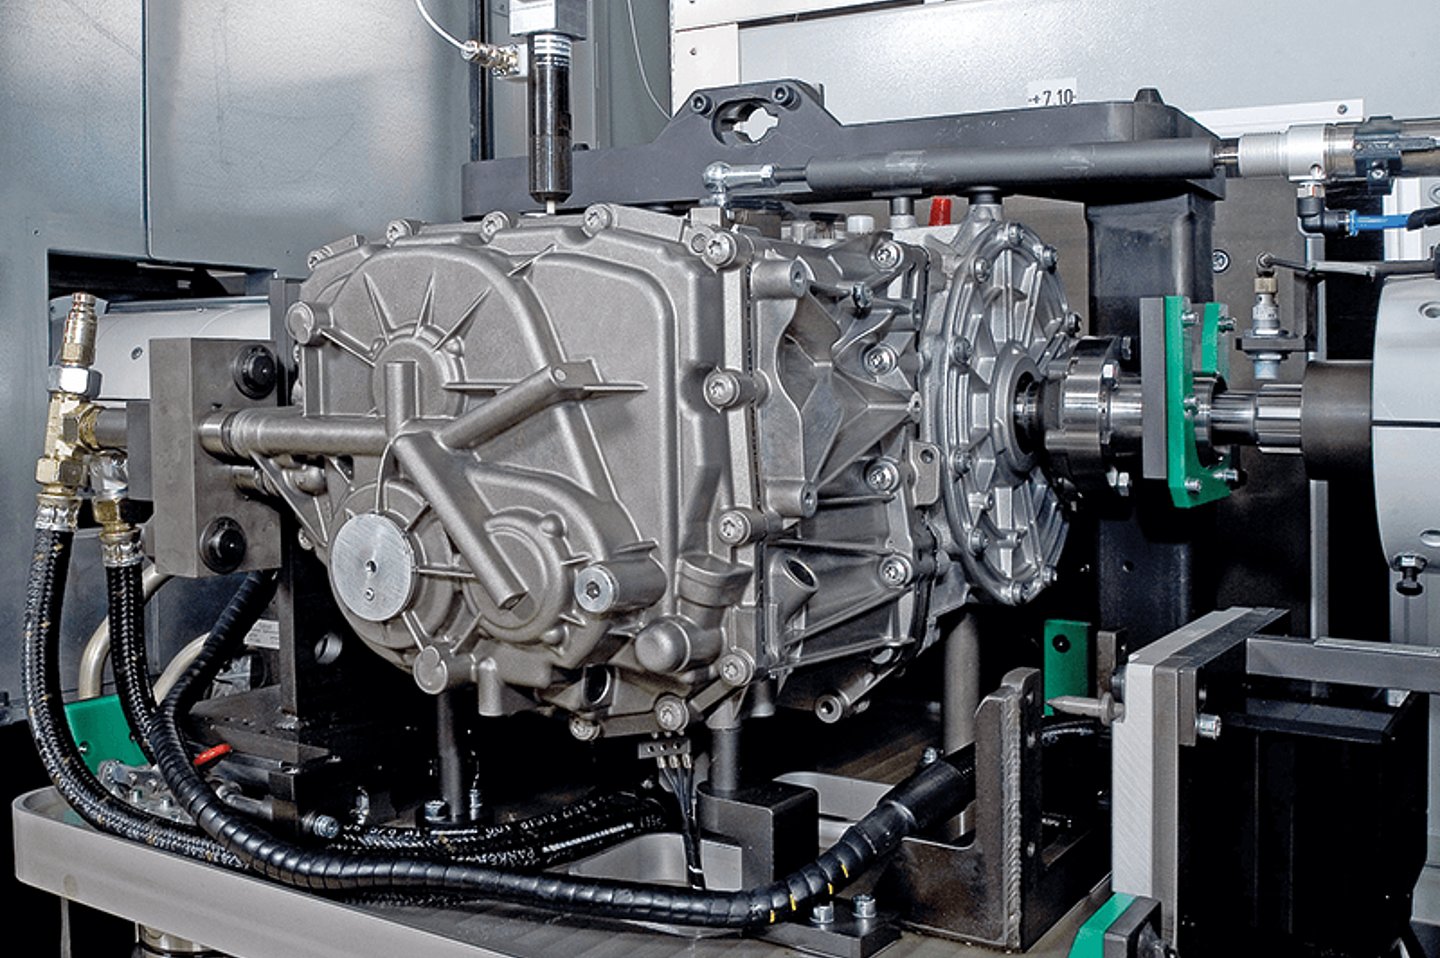 Eol test stand from Blum-Novotest for testing dual-clutch transmissions